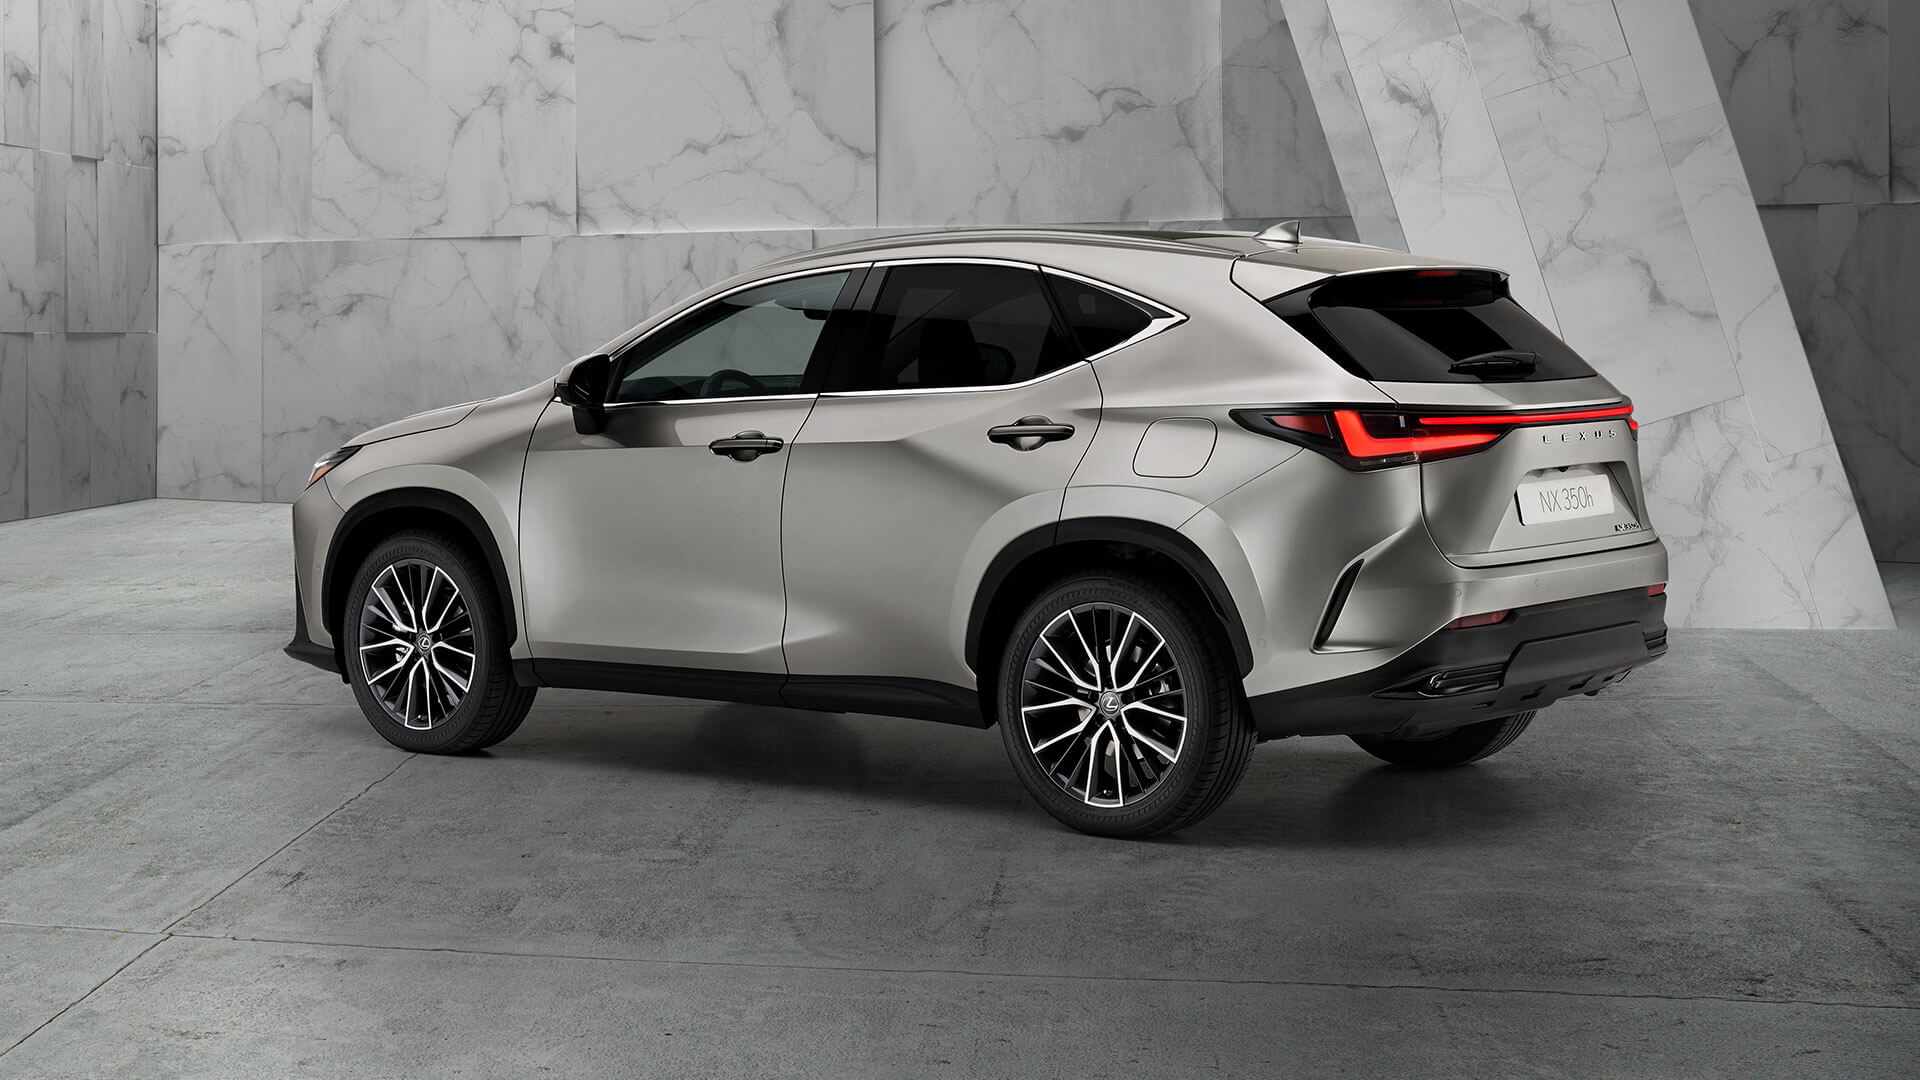 2021-lexus-all-new-nx-overview-350h-gallery-02-1920x1080